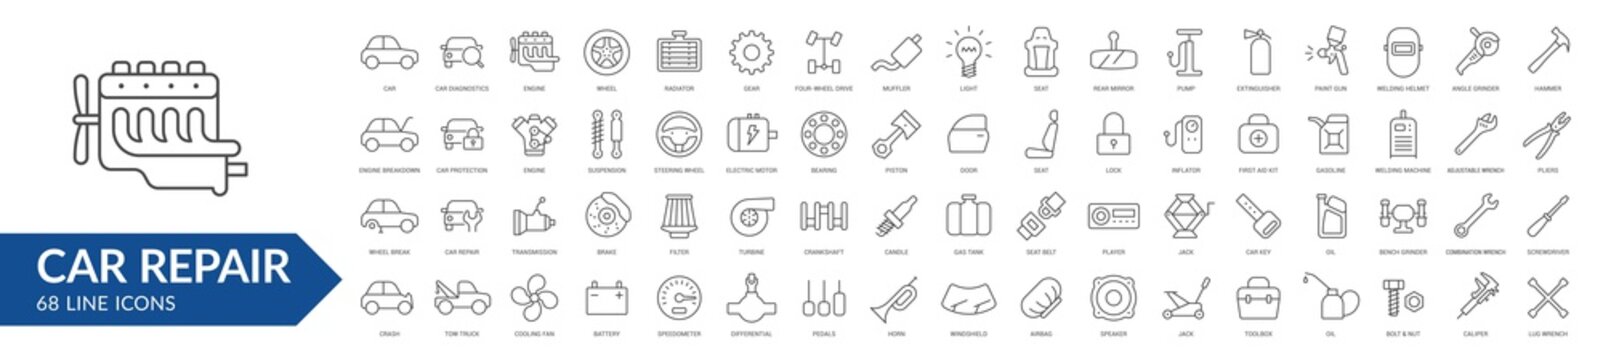 Car repair line icon set. Isolated signs on white background. Services & car parts & toolsVector illustration. Collection